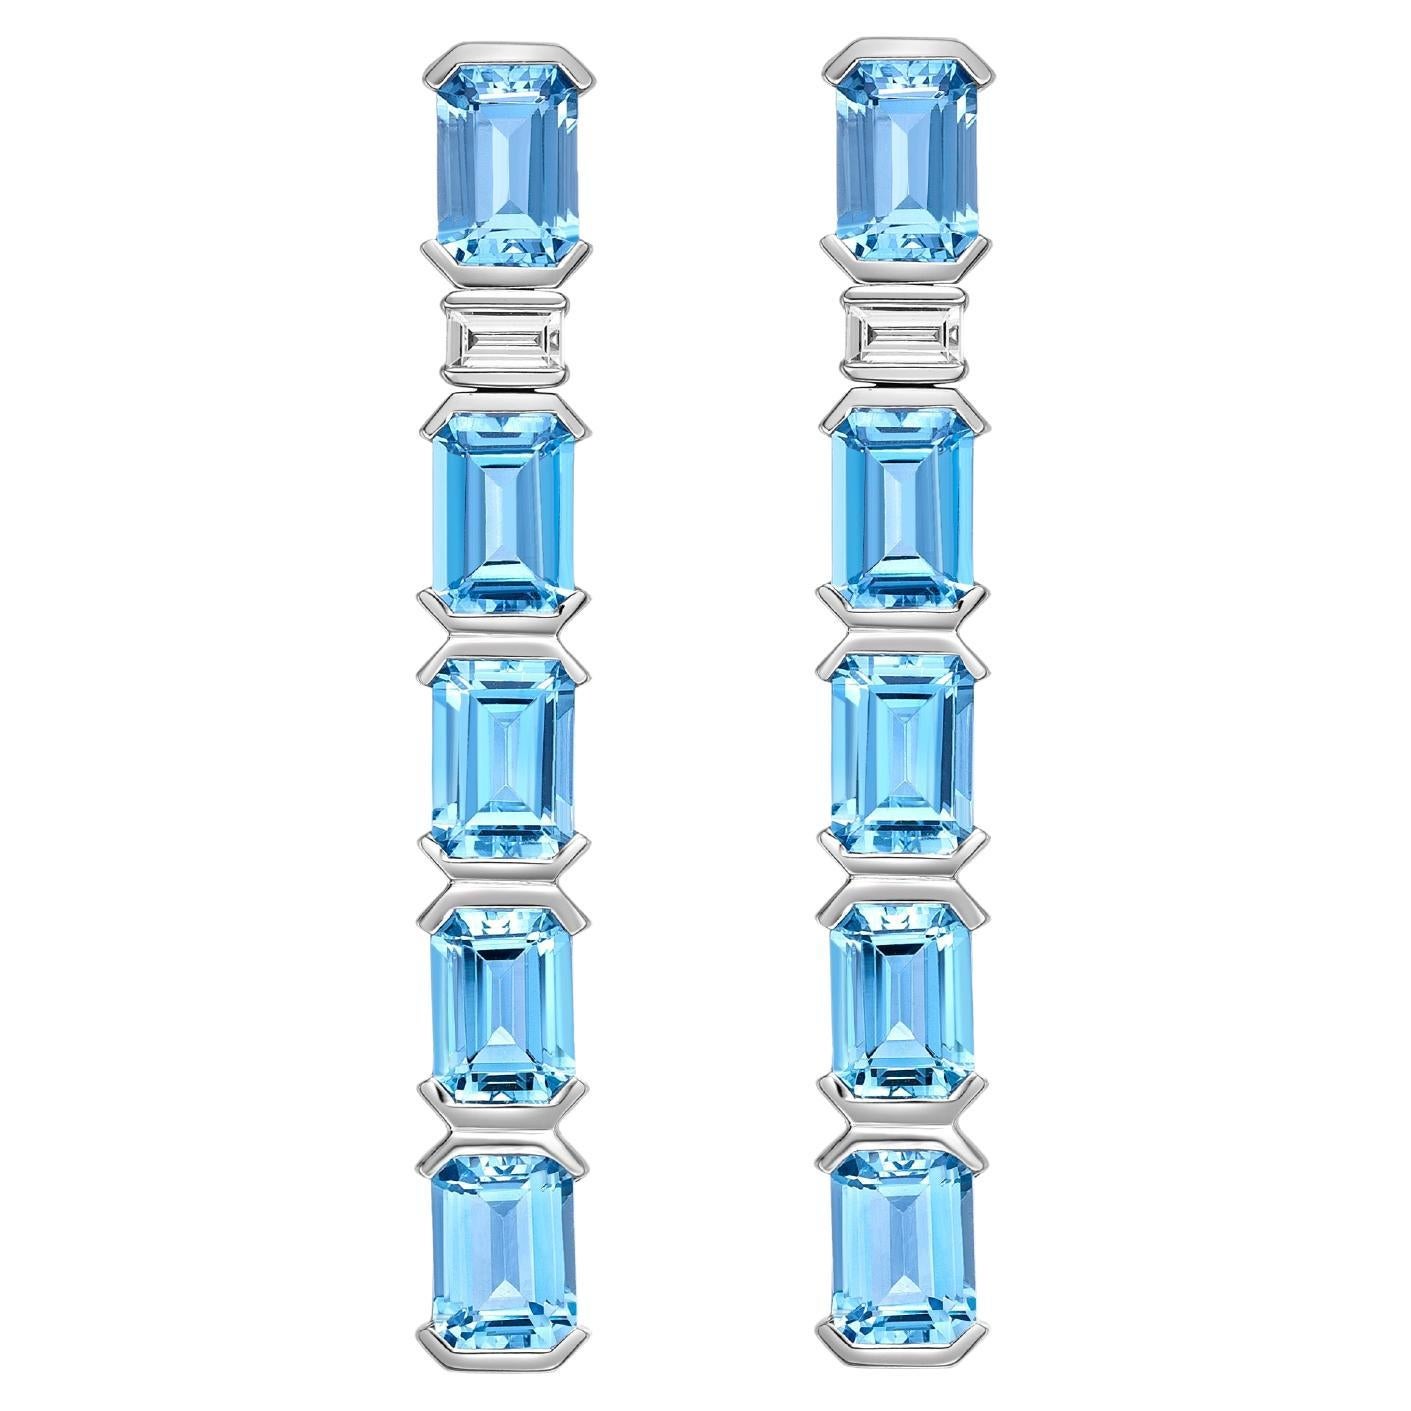 8.63 Carat Aquamarine Drop Earrings in 18Karat White Gold with White Diamond. For Sale